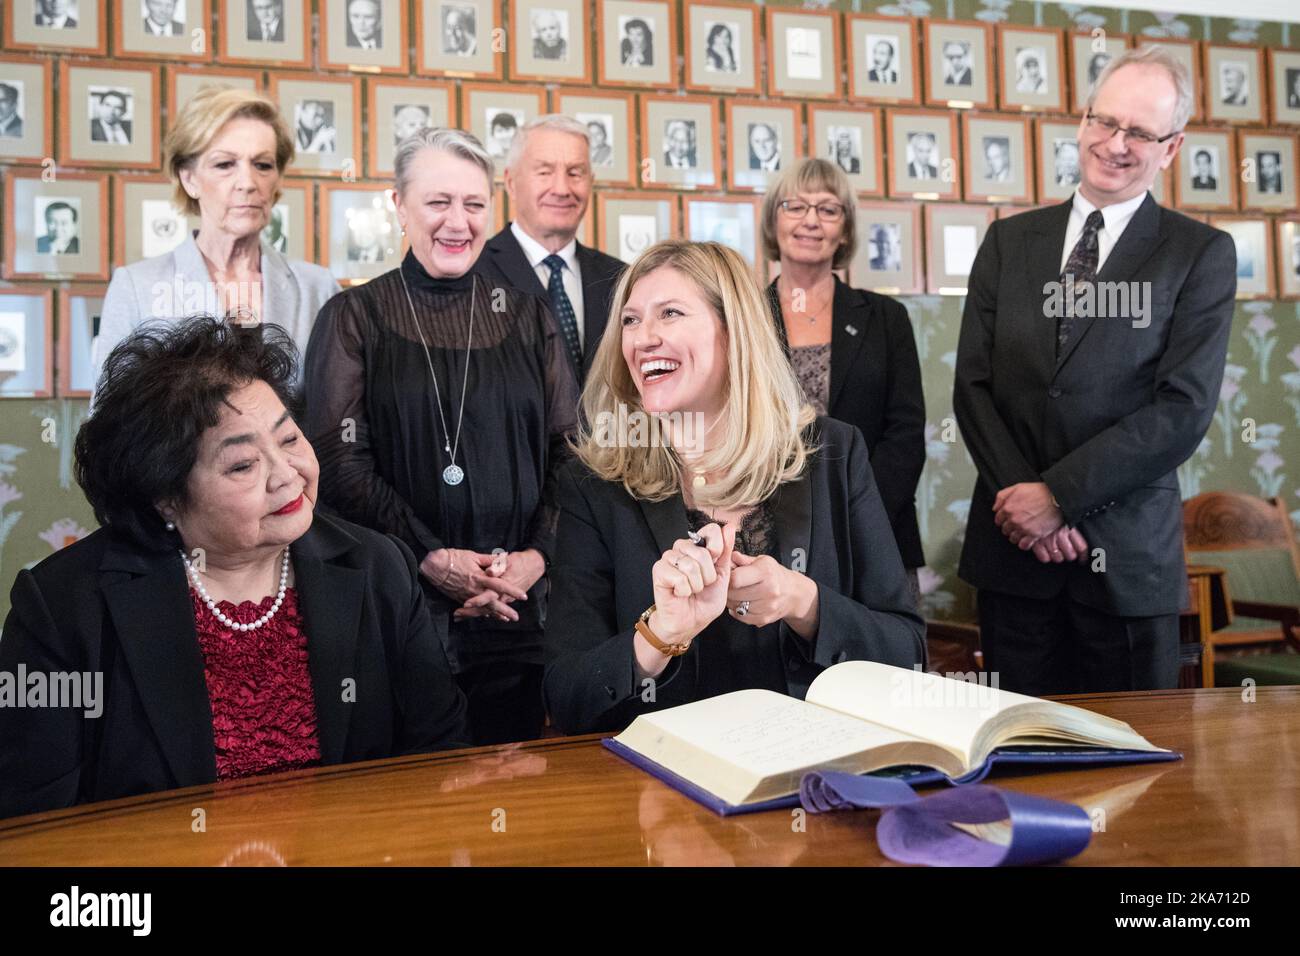 Oslo, Norway 20171209. Nobel Peace Prize 2017 to International Campaign to Abolish Nuclear Weapons (ICAN). Director of Peace Prize winner ICAN, Beatrice Fihn, signs the protocol at Nobel Institute Saturday. To the left Hiroshima survivor Setsuko Thurlow. Back from left: Inger-Marie Ytterhorn, Berit Reiss-Andersen, Thorbjørn Jagland, Tone Joerstad and Henrik Syse from the Nobel Committee. Photo: Audun Braastad / NTB scanpi Stock Photo